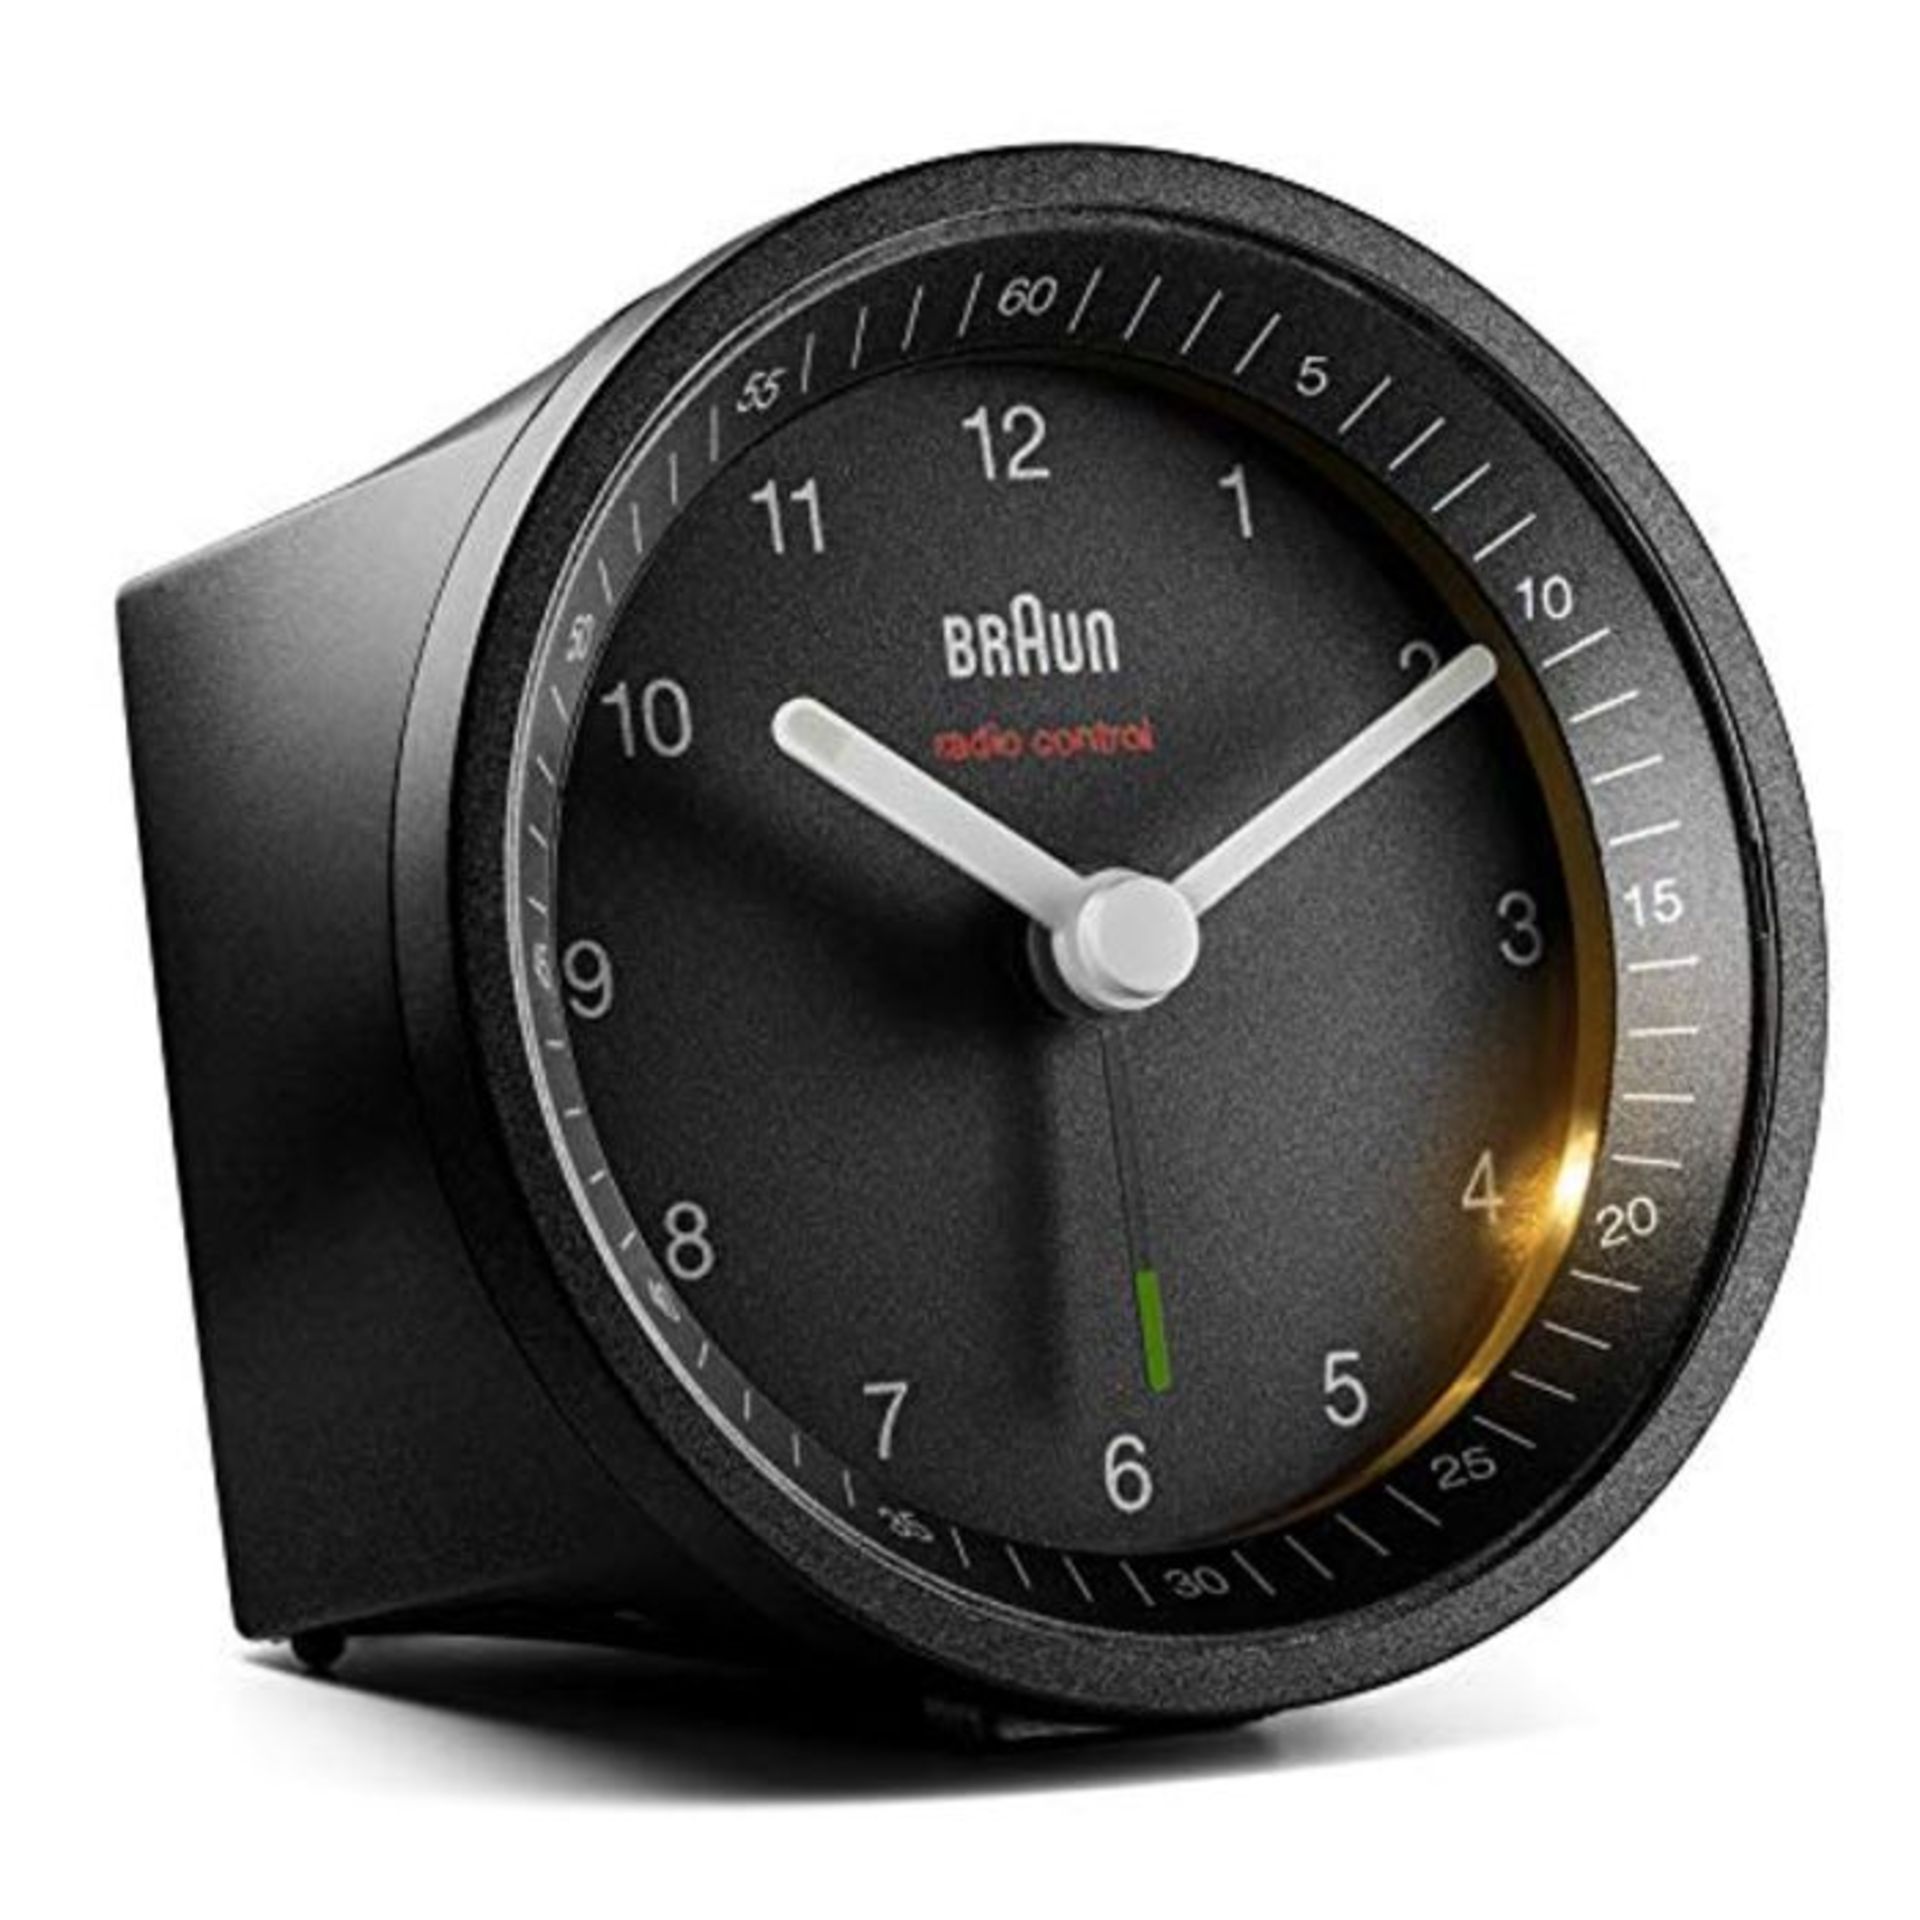 Braun Classic Radio Controlled Analogue Clock for Central European Time Zone (DCF/GMT+